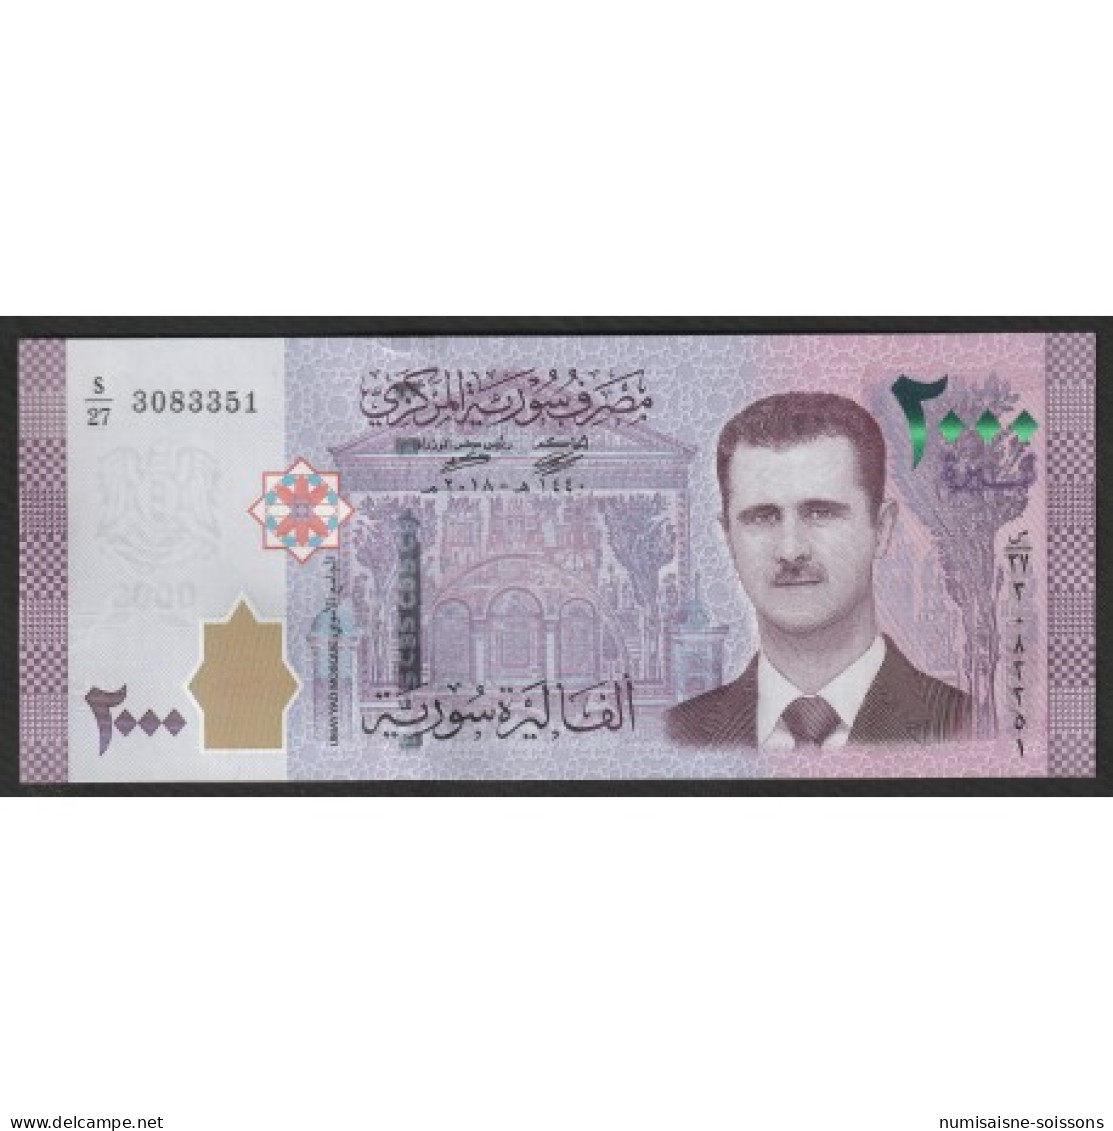 SYRIE - PICK 117 - 2000 POUNDS - 2018 - Syria